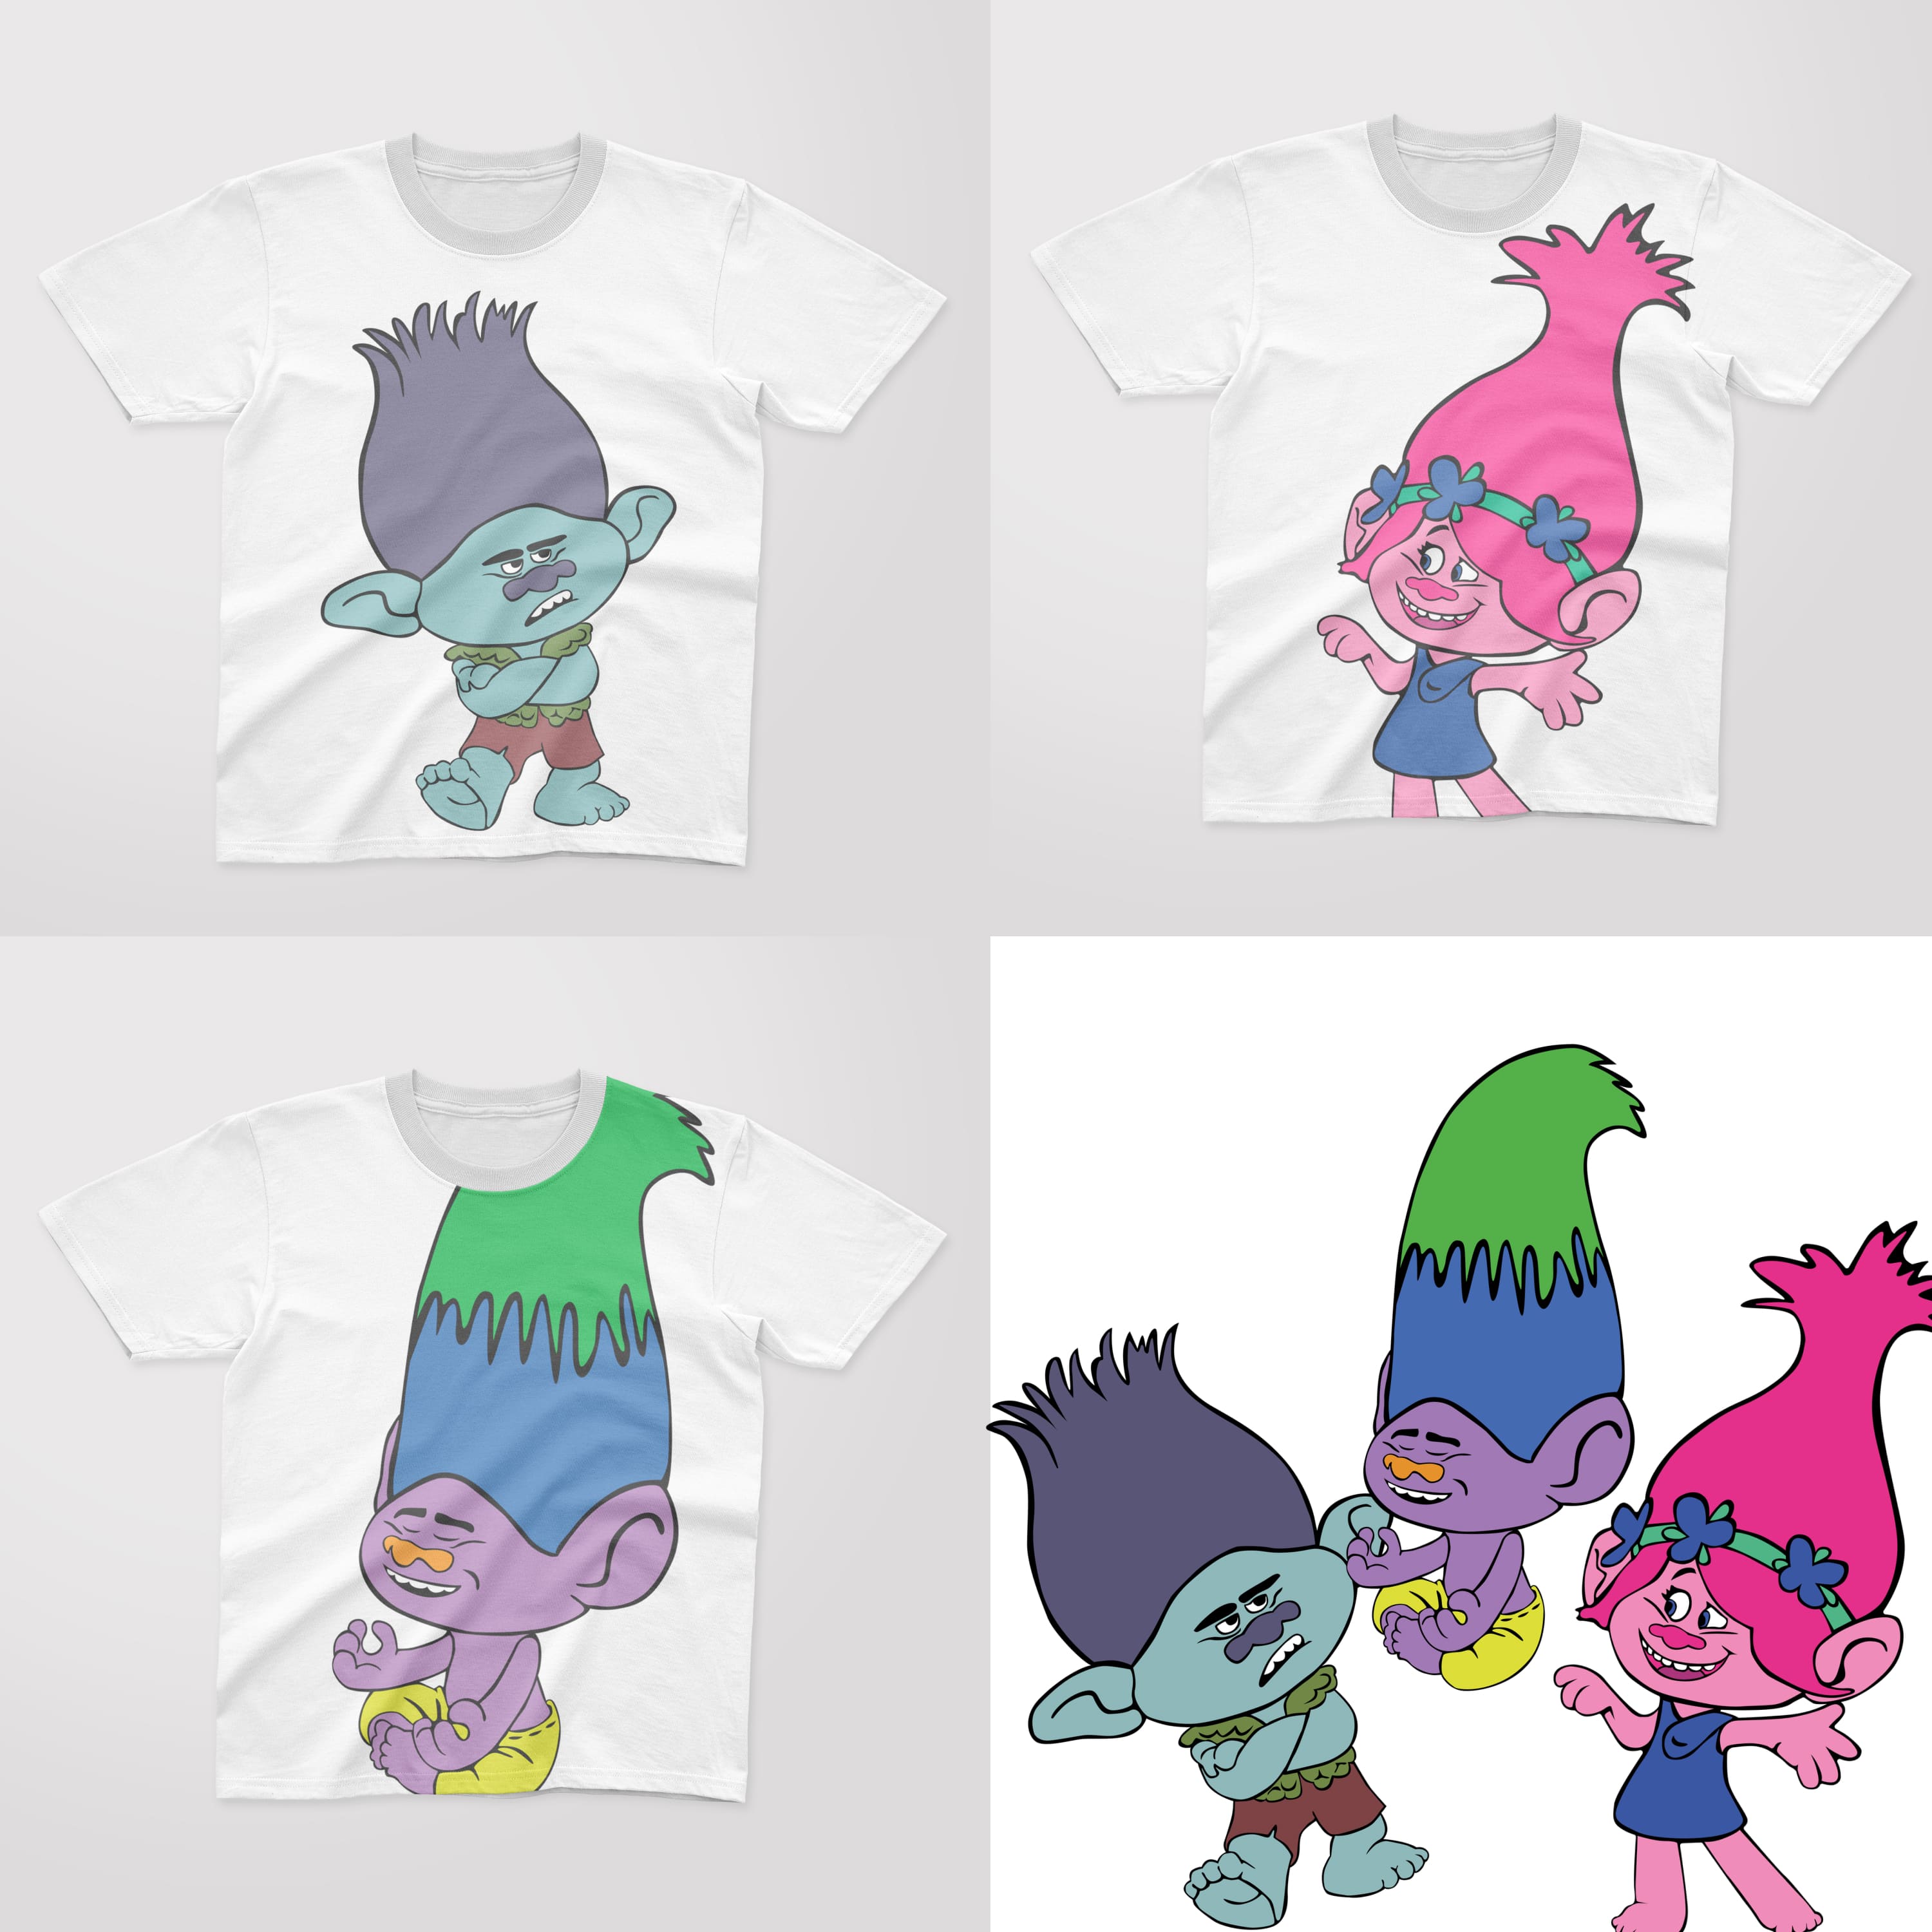 Preview 3 Troll Shirt Designs Cover.